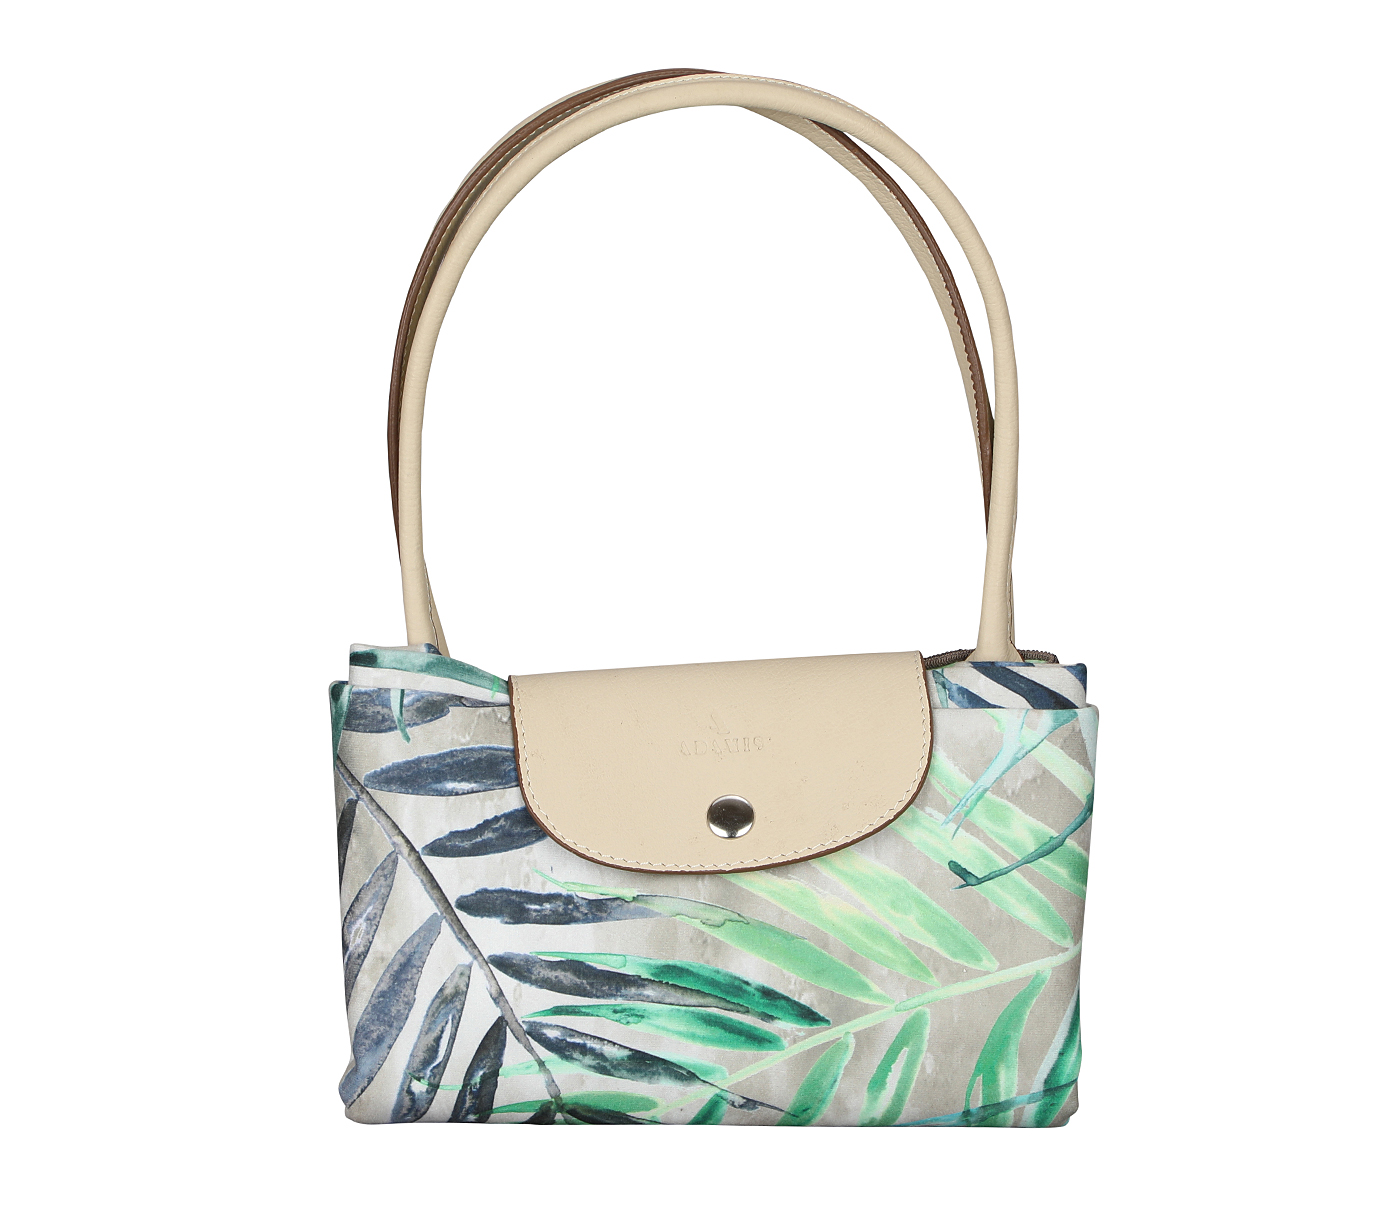 B882--Adelina Folding tote  in leaf print material with genuine leather handles and flap - Green